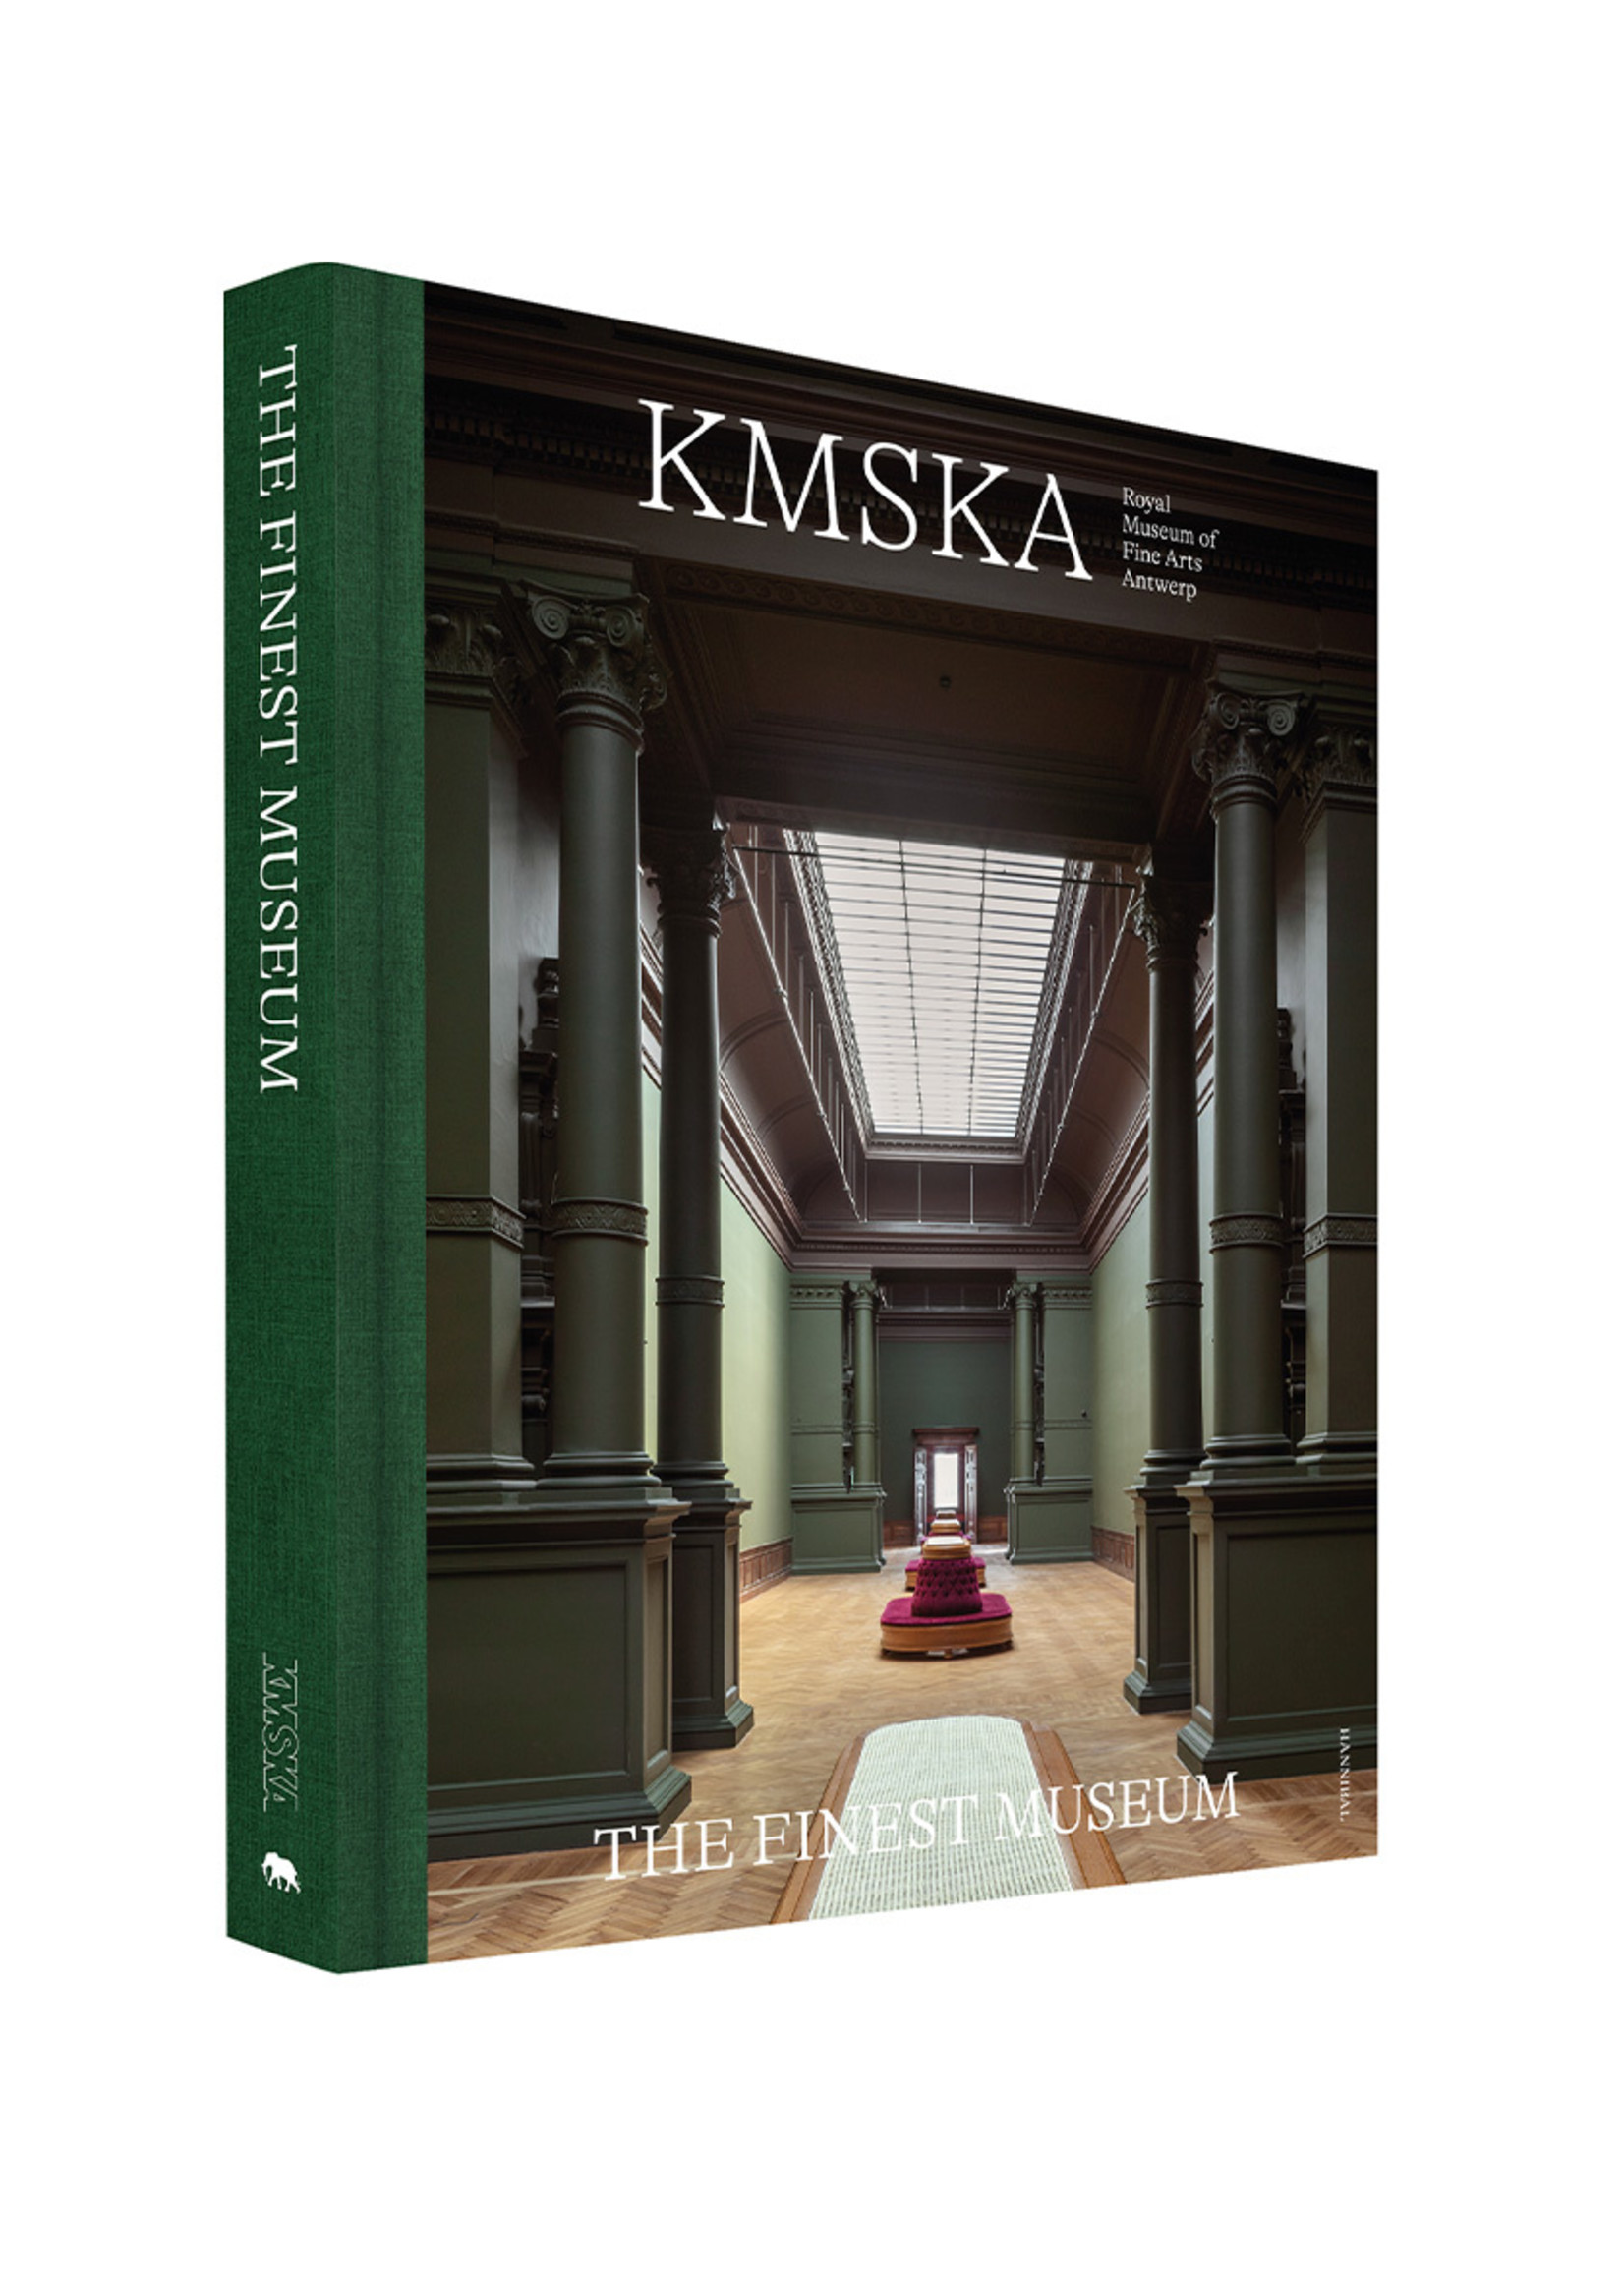 KMSKA – THE FINEST MUSEUM Hardcover English version